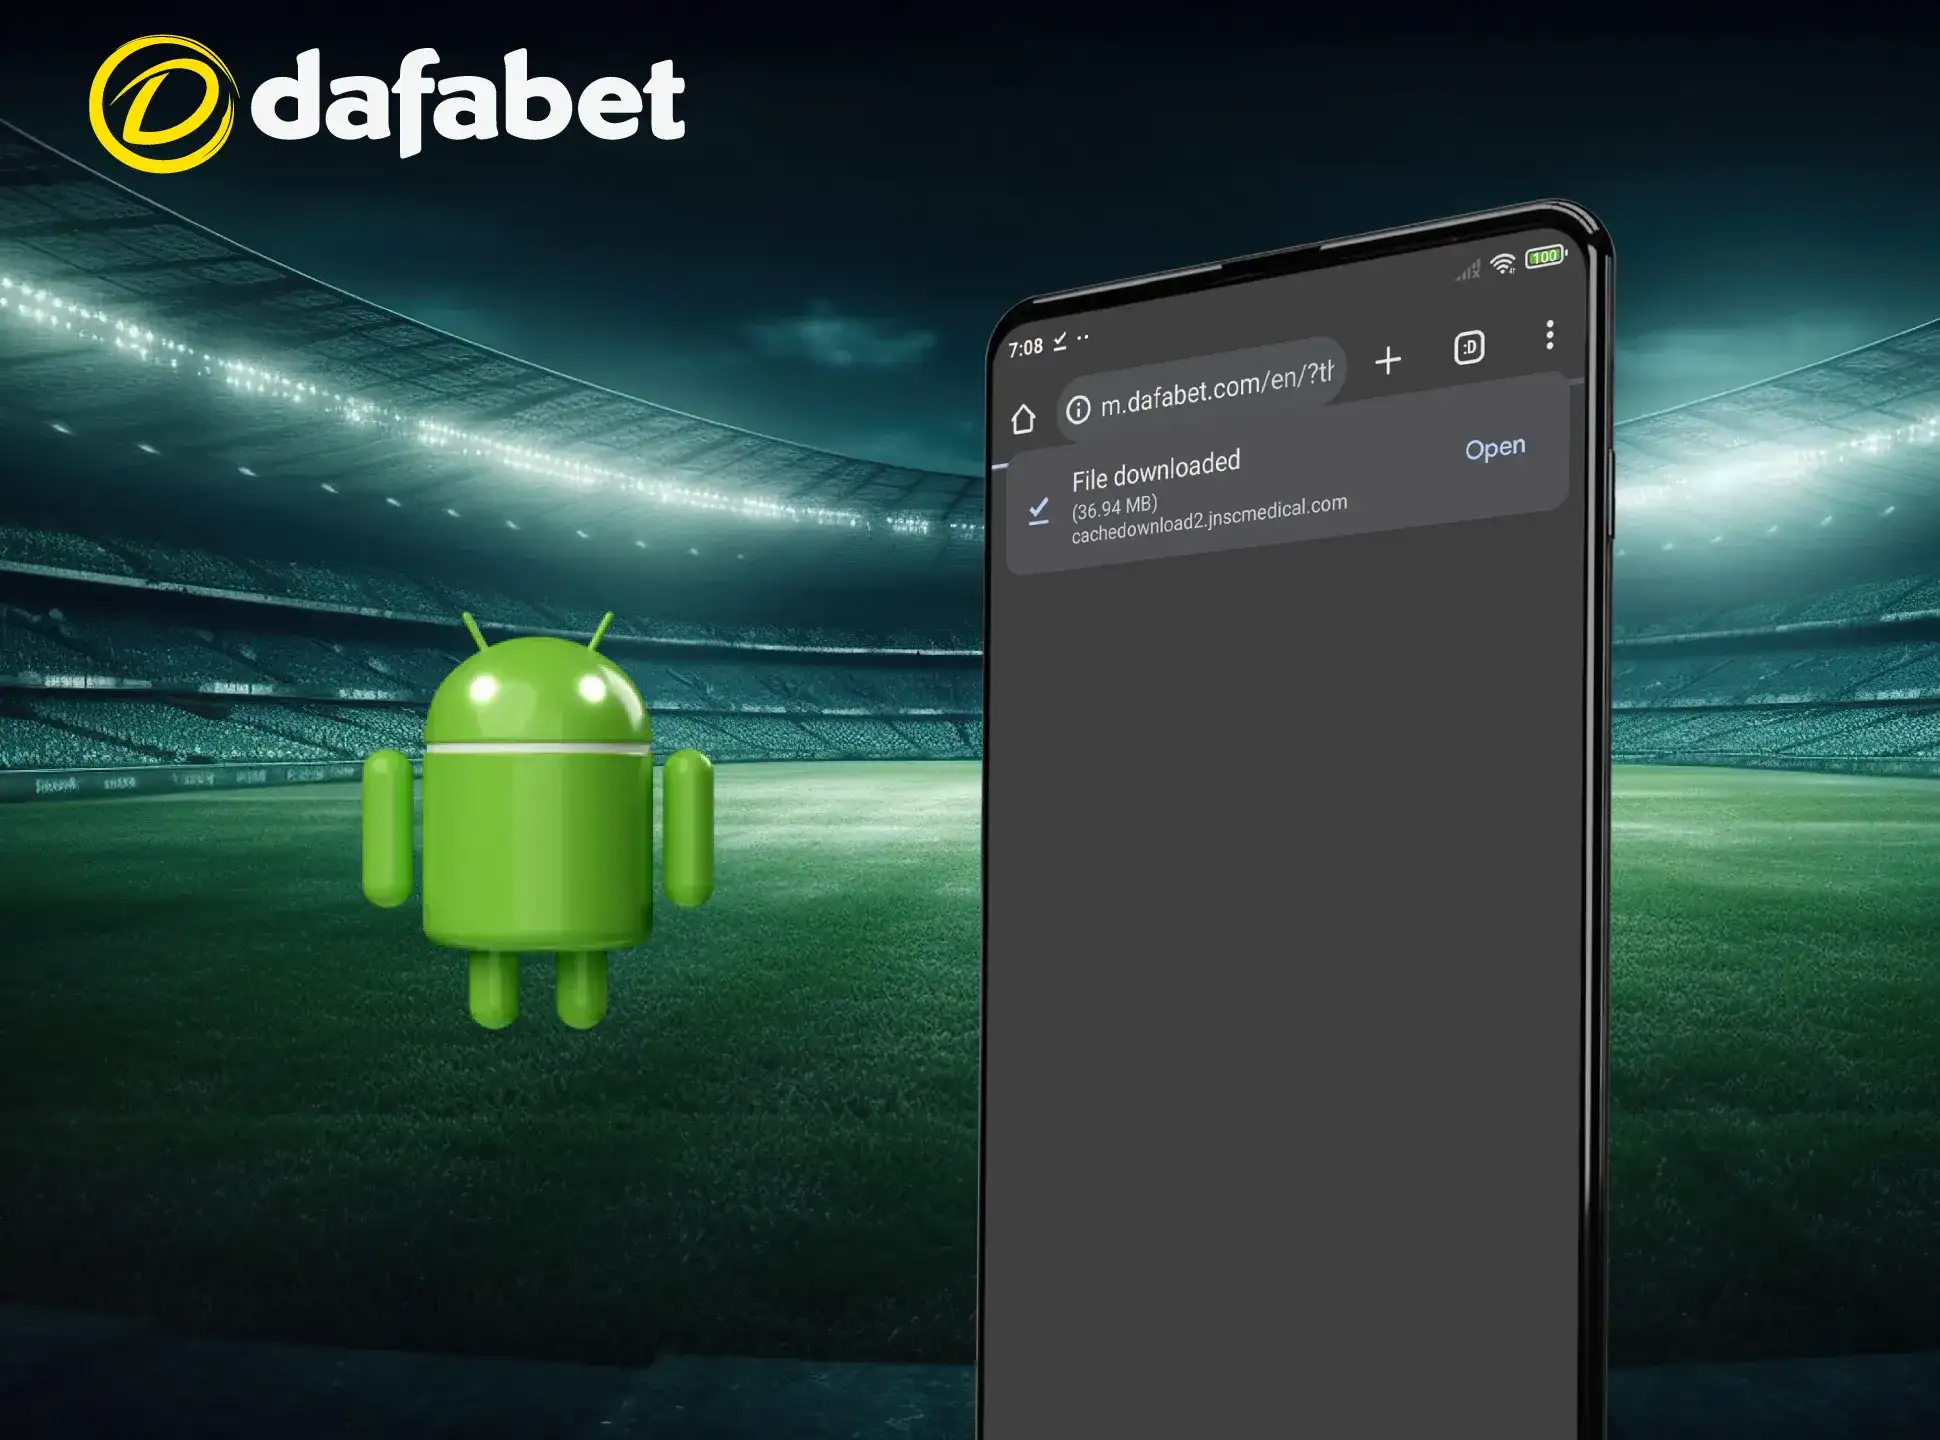 Install the Dafabet app and complete the download.